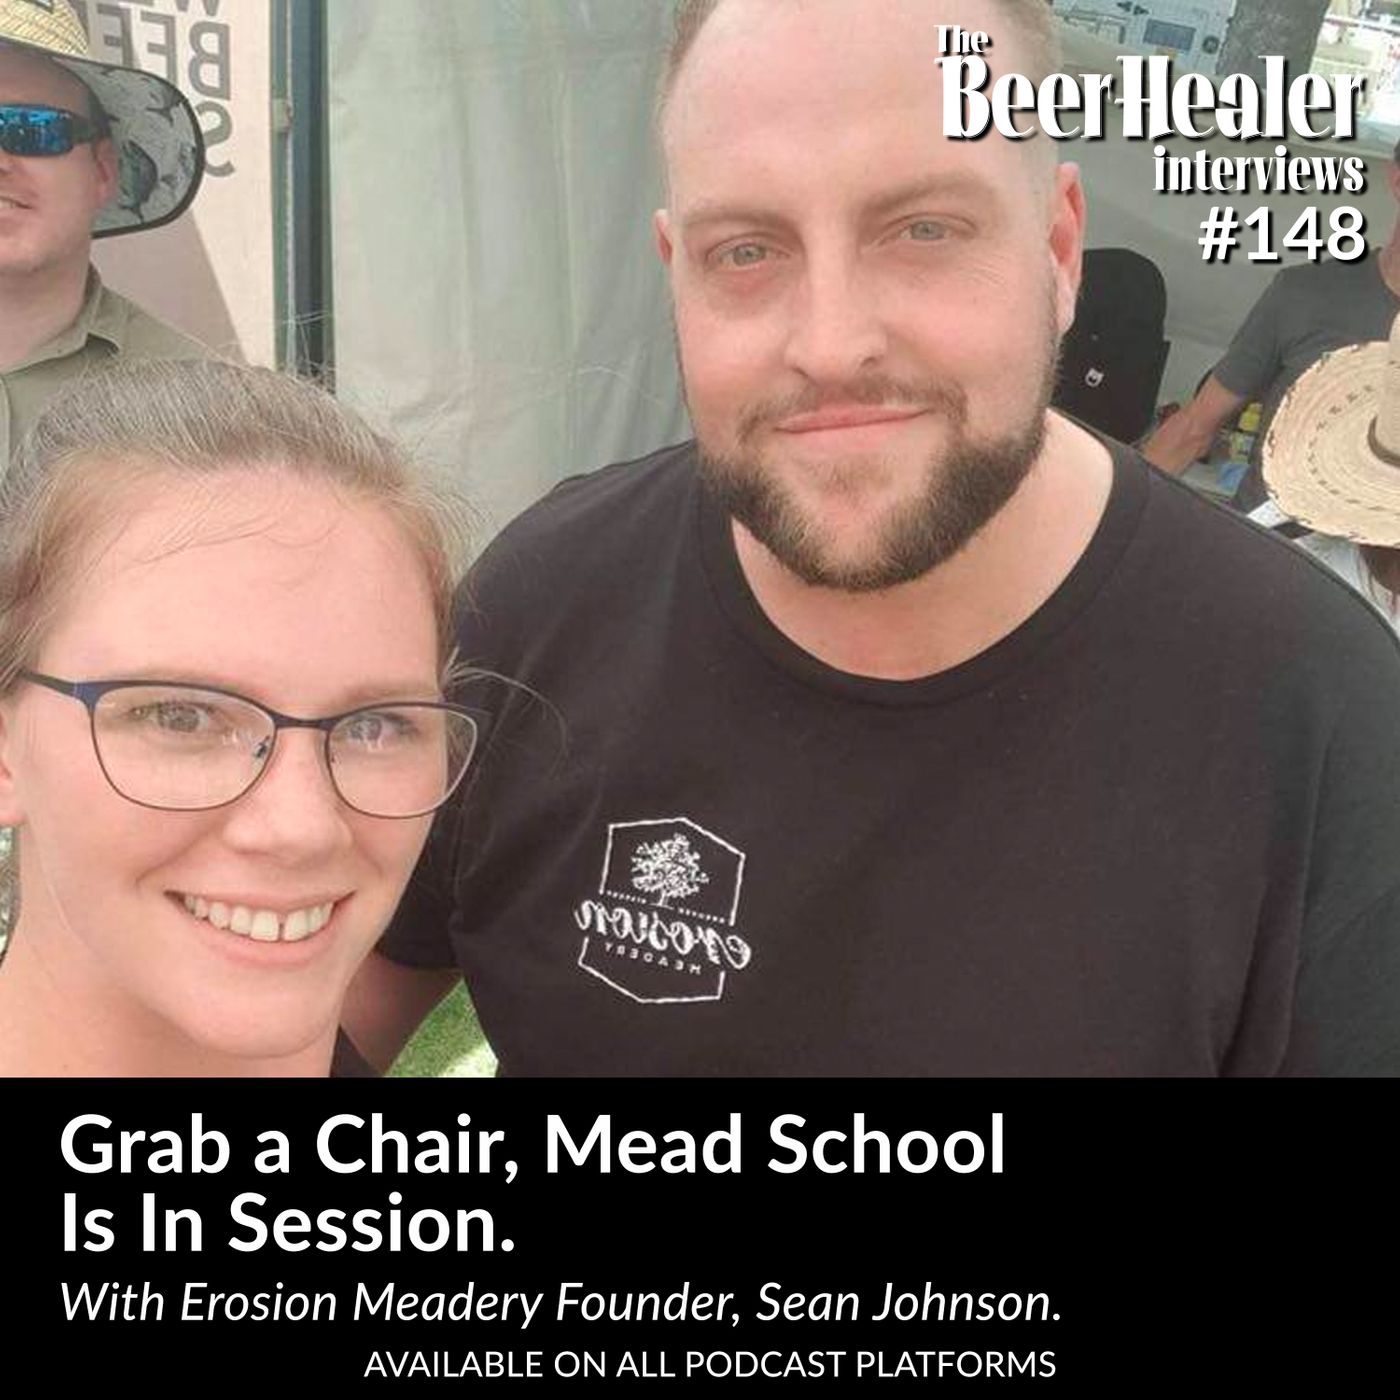 Ep. 148 - Grab a Chair, Mead School Is In Session. With Erosion Meadery Founder, Sean Johnson.